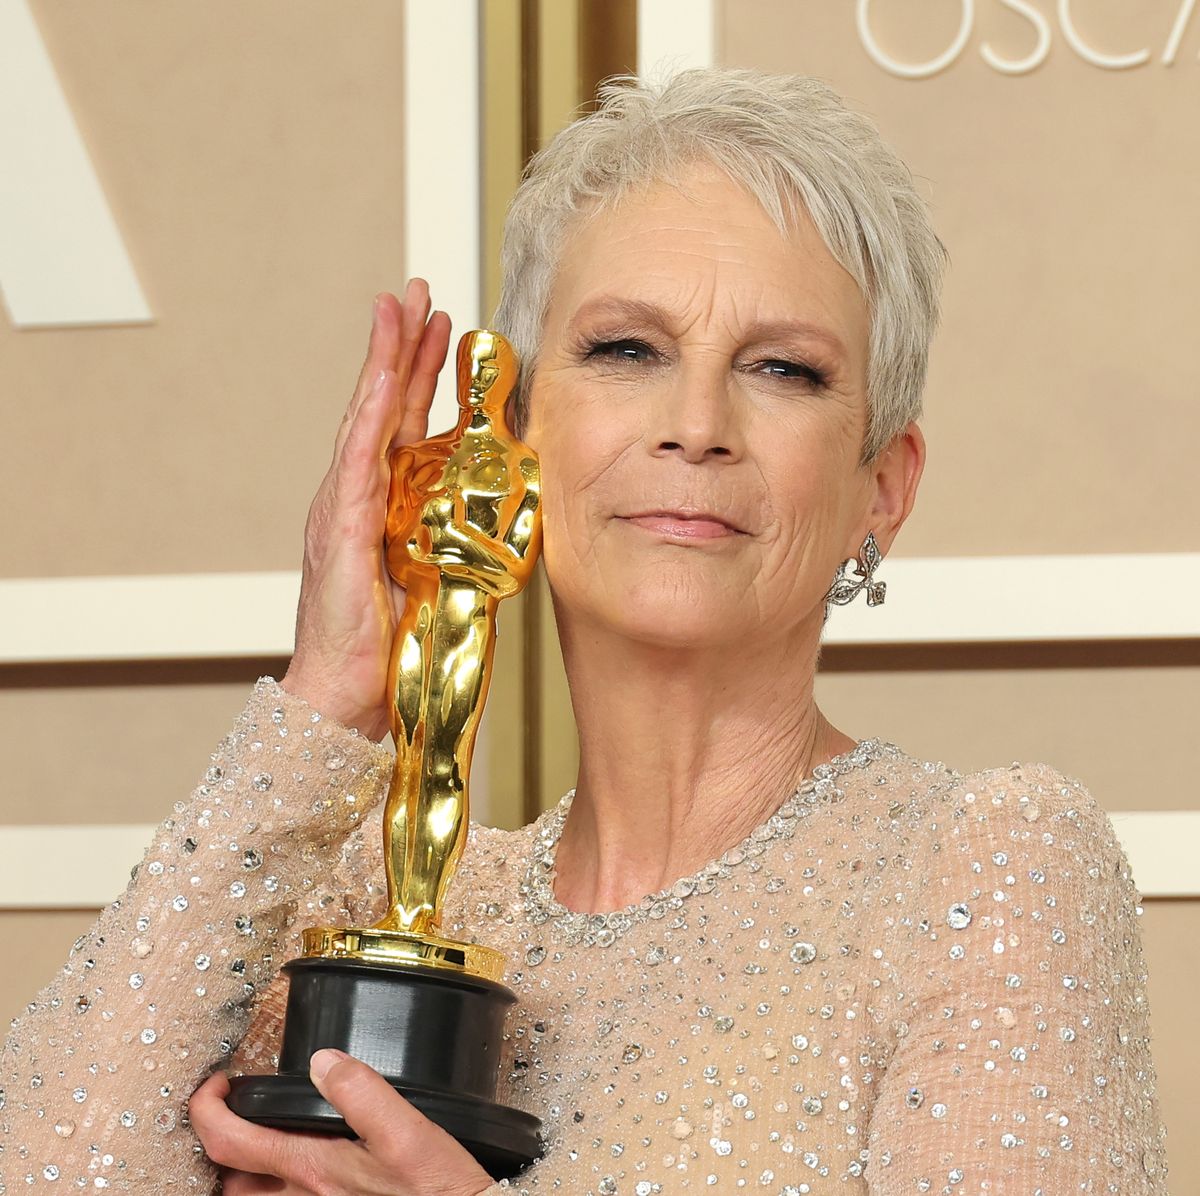 Jamie Lee Curtis Suffers Injury After Oscars Win: 'Agony'